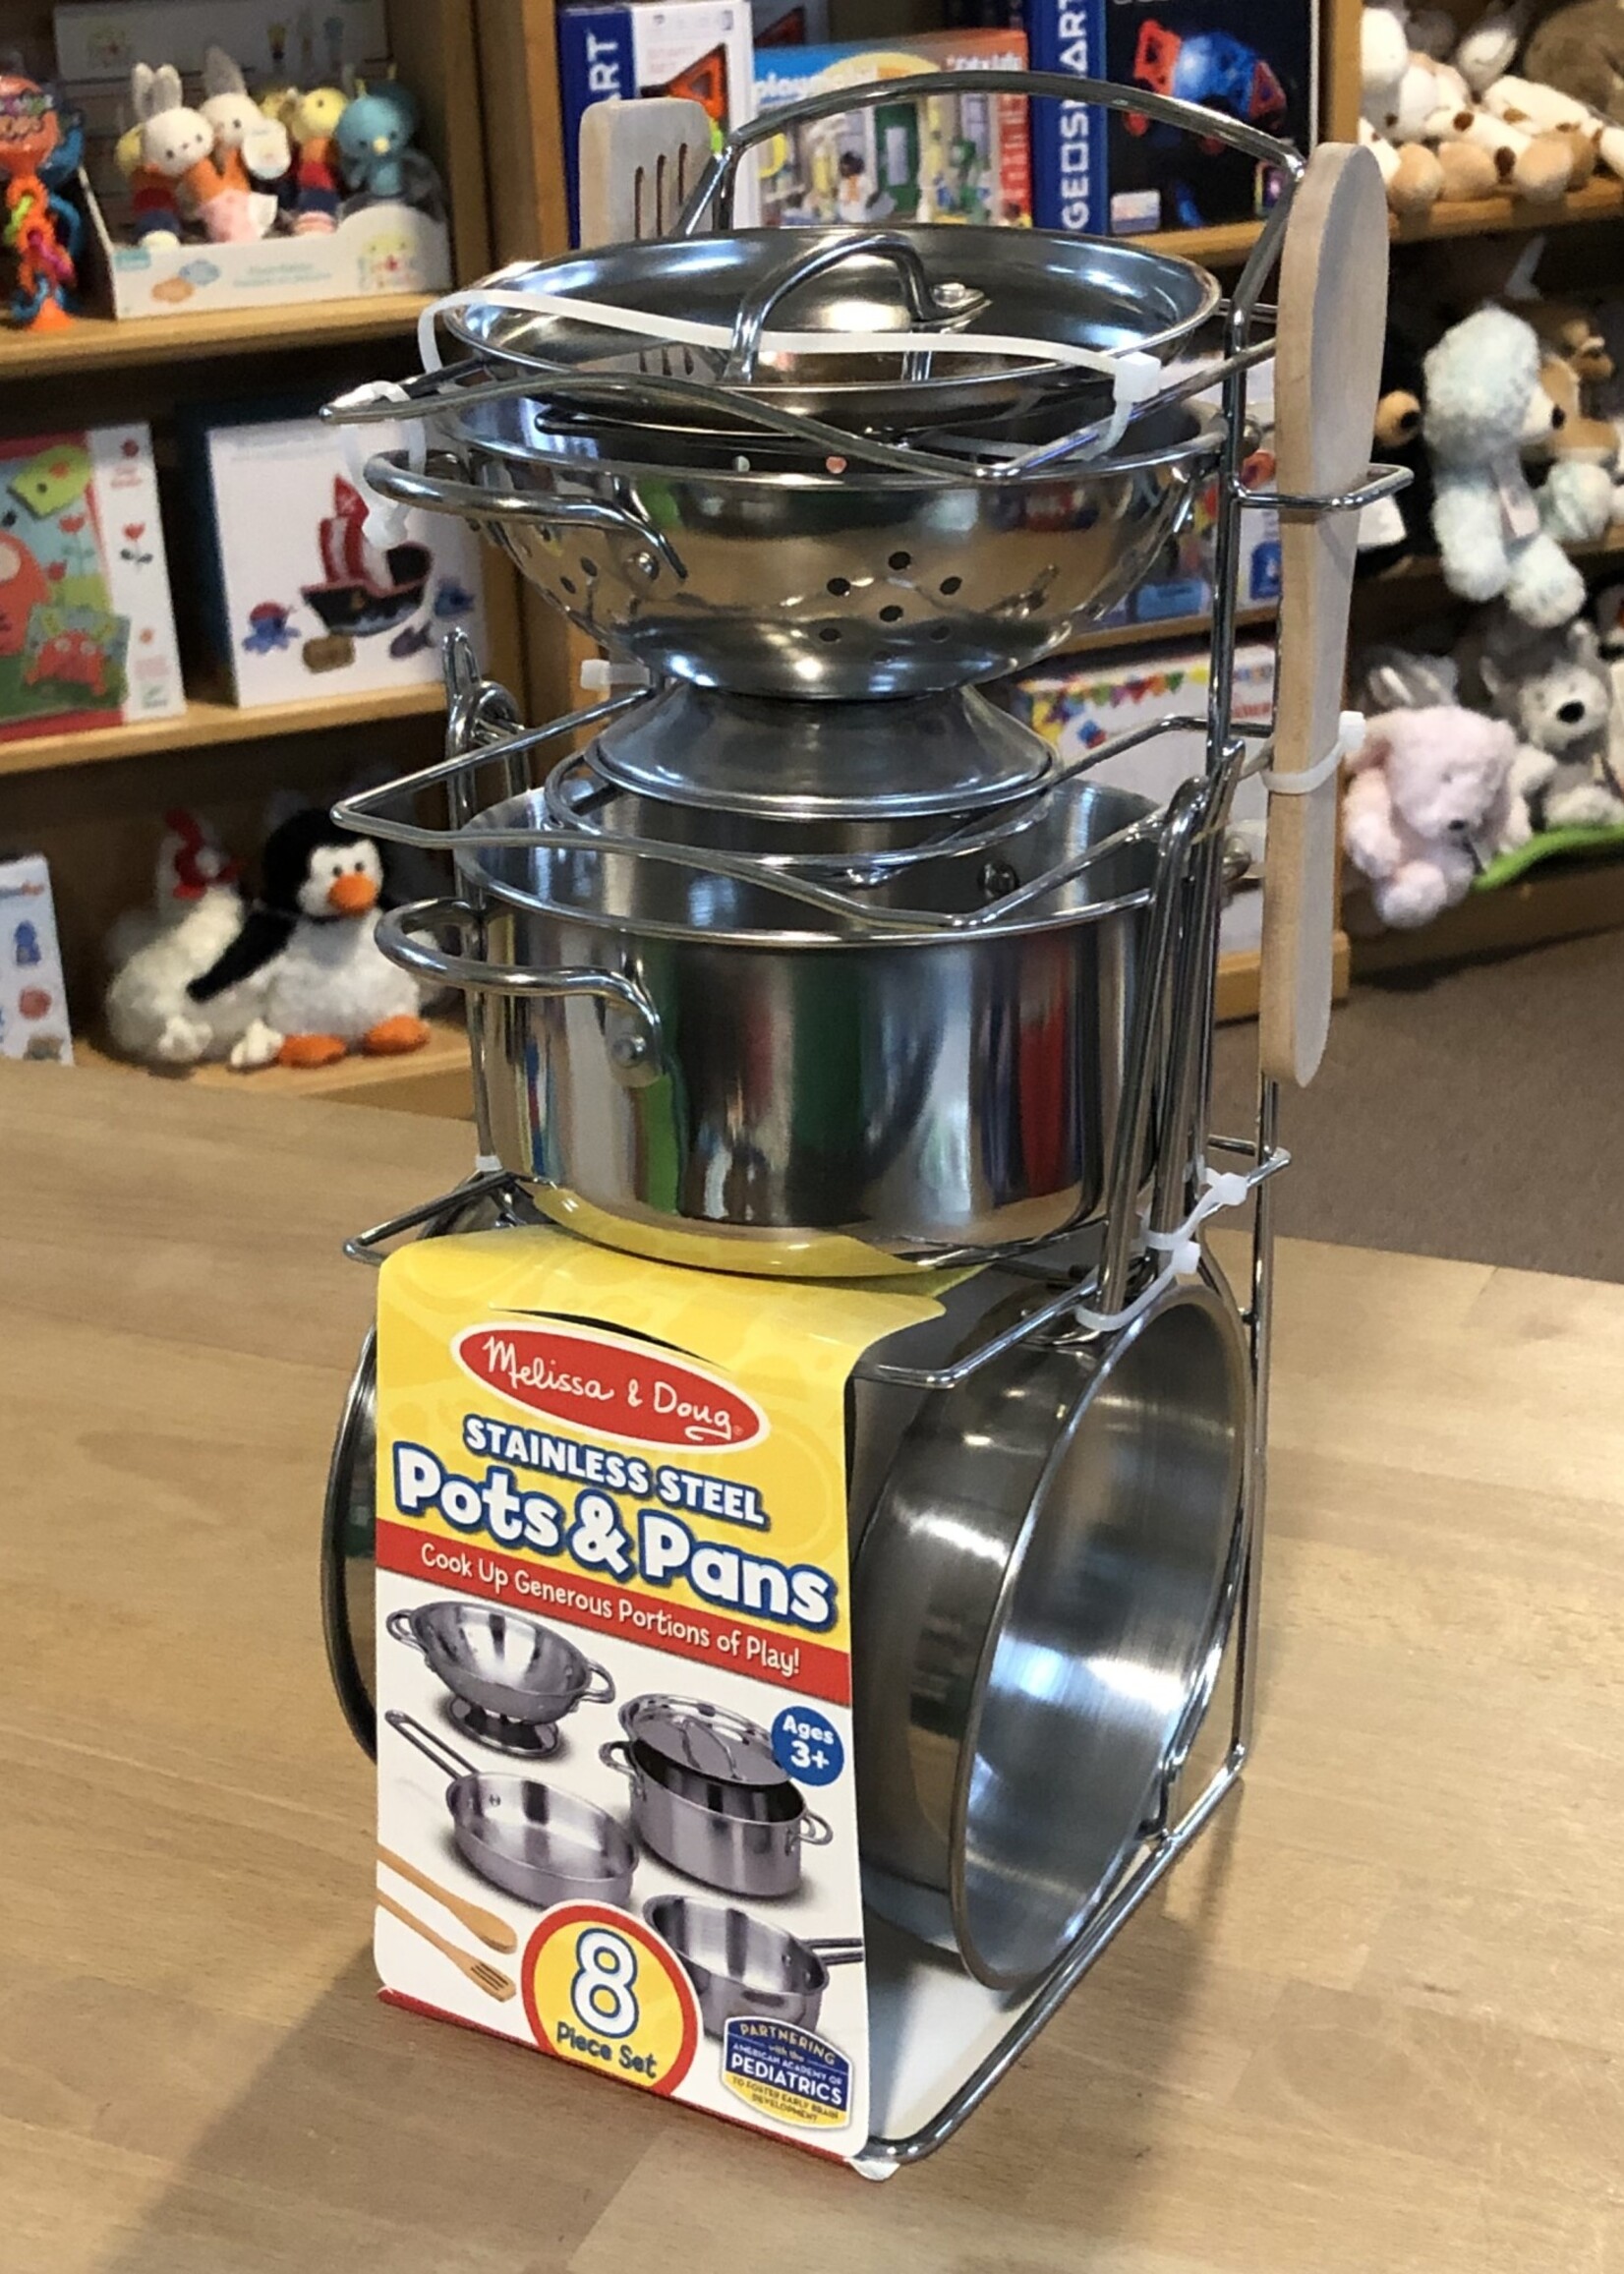 Melissa & Doug Stainless Steel Pots and Pans